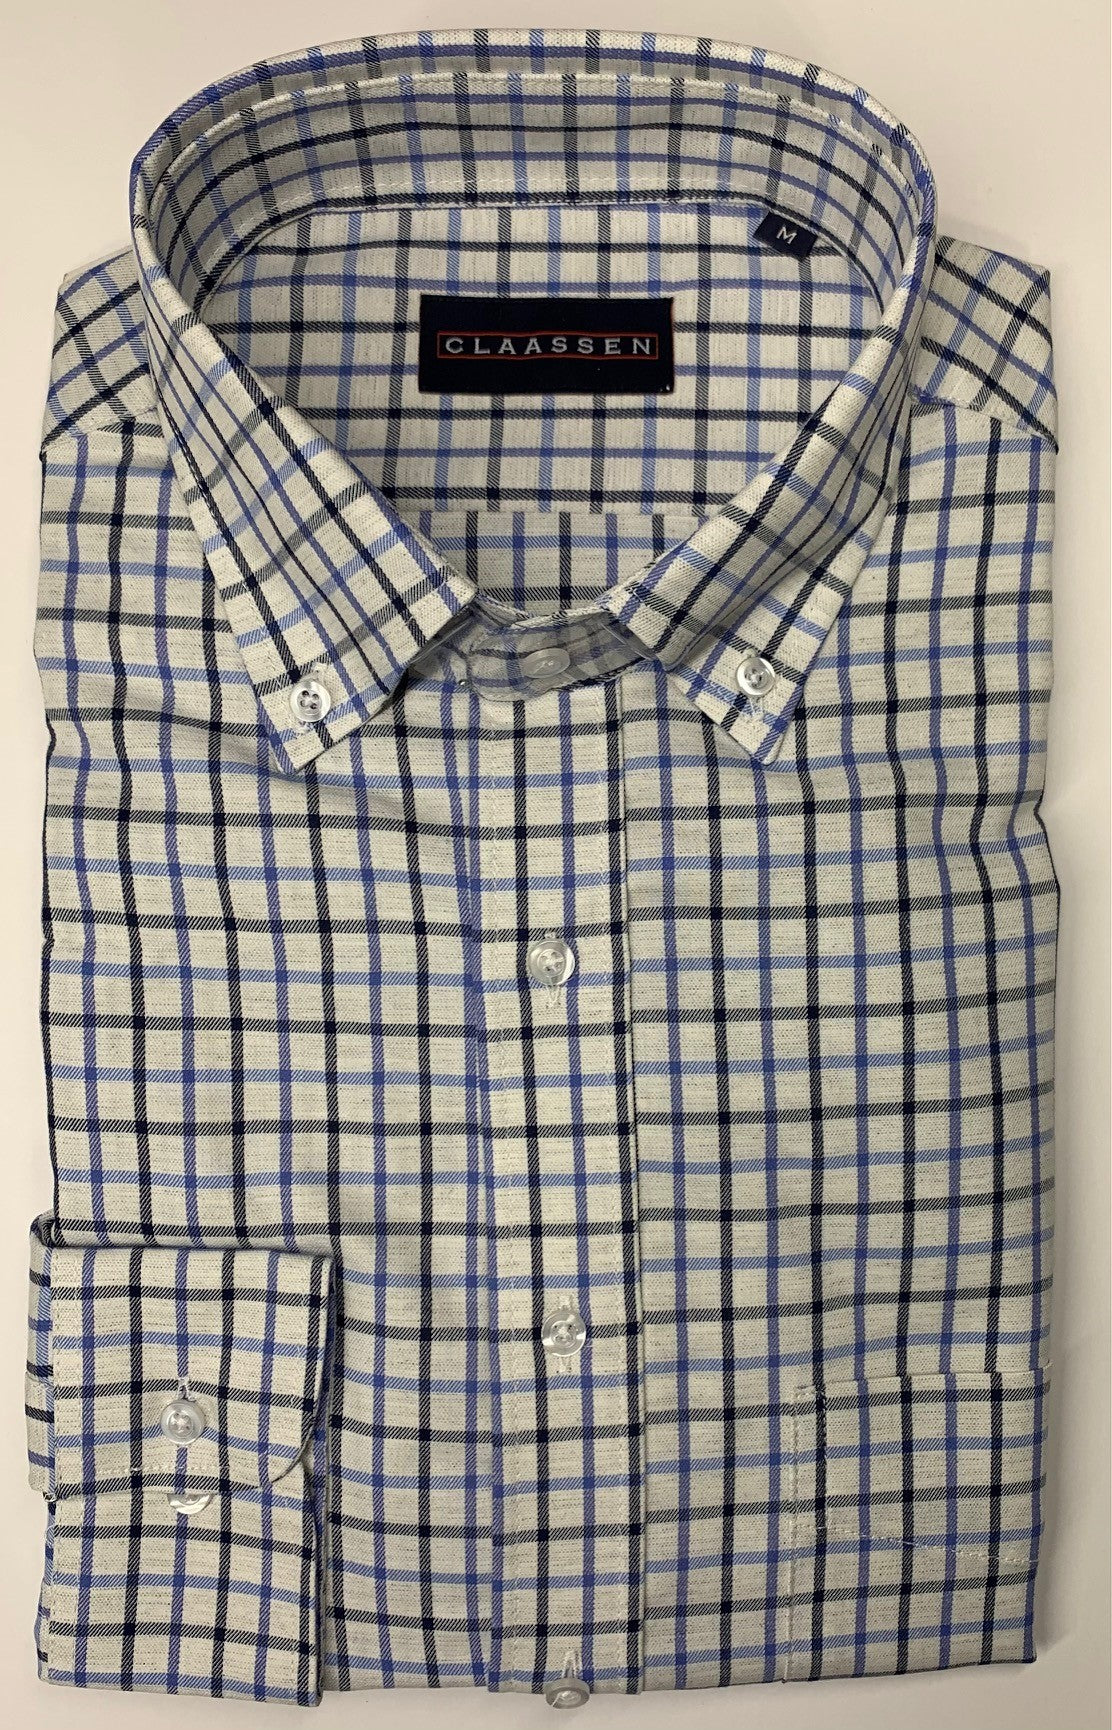 Claassen Luxury Button Down Light Grey with Black and Blue Check Sport Shirt